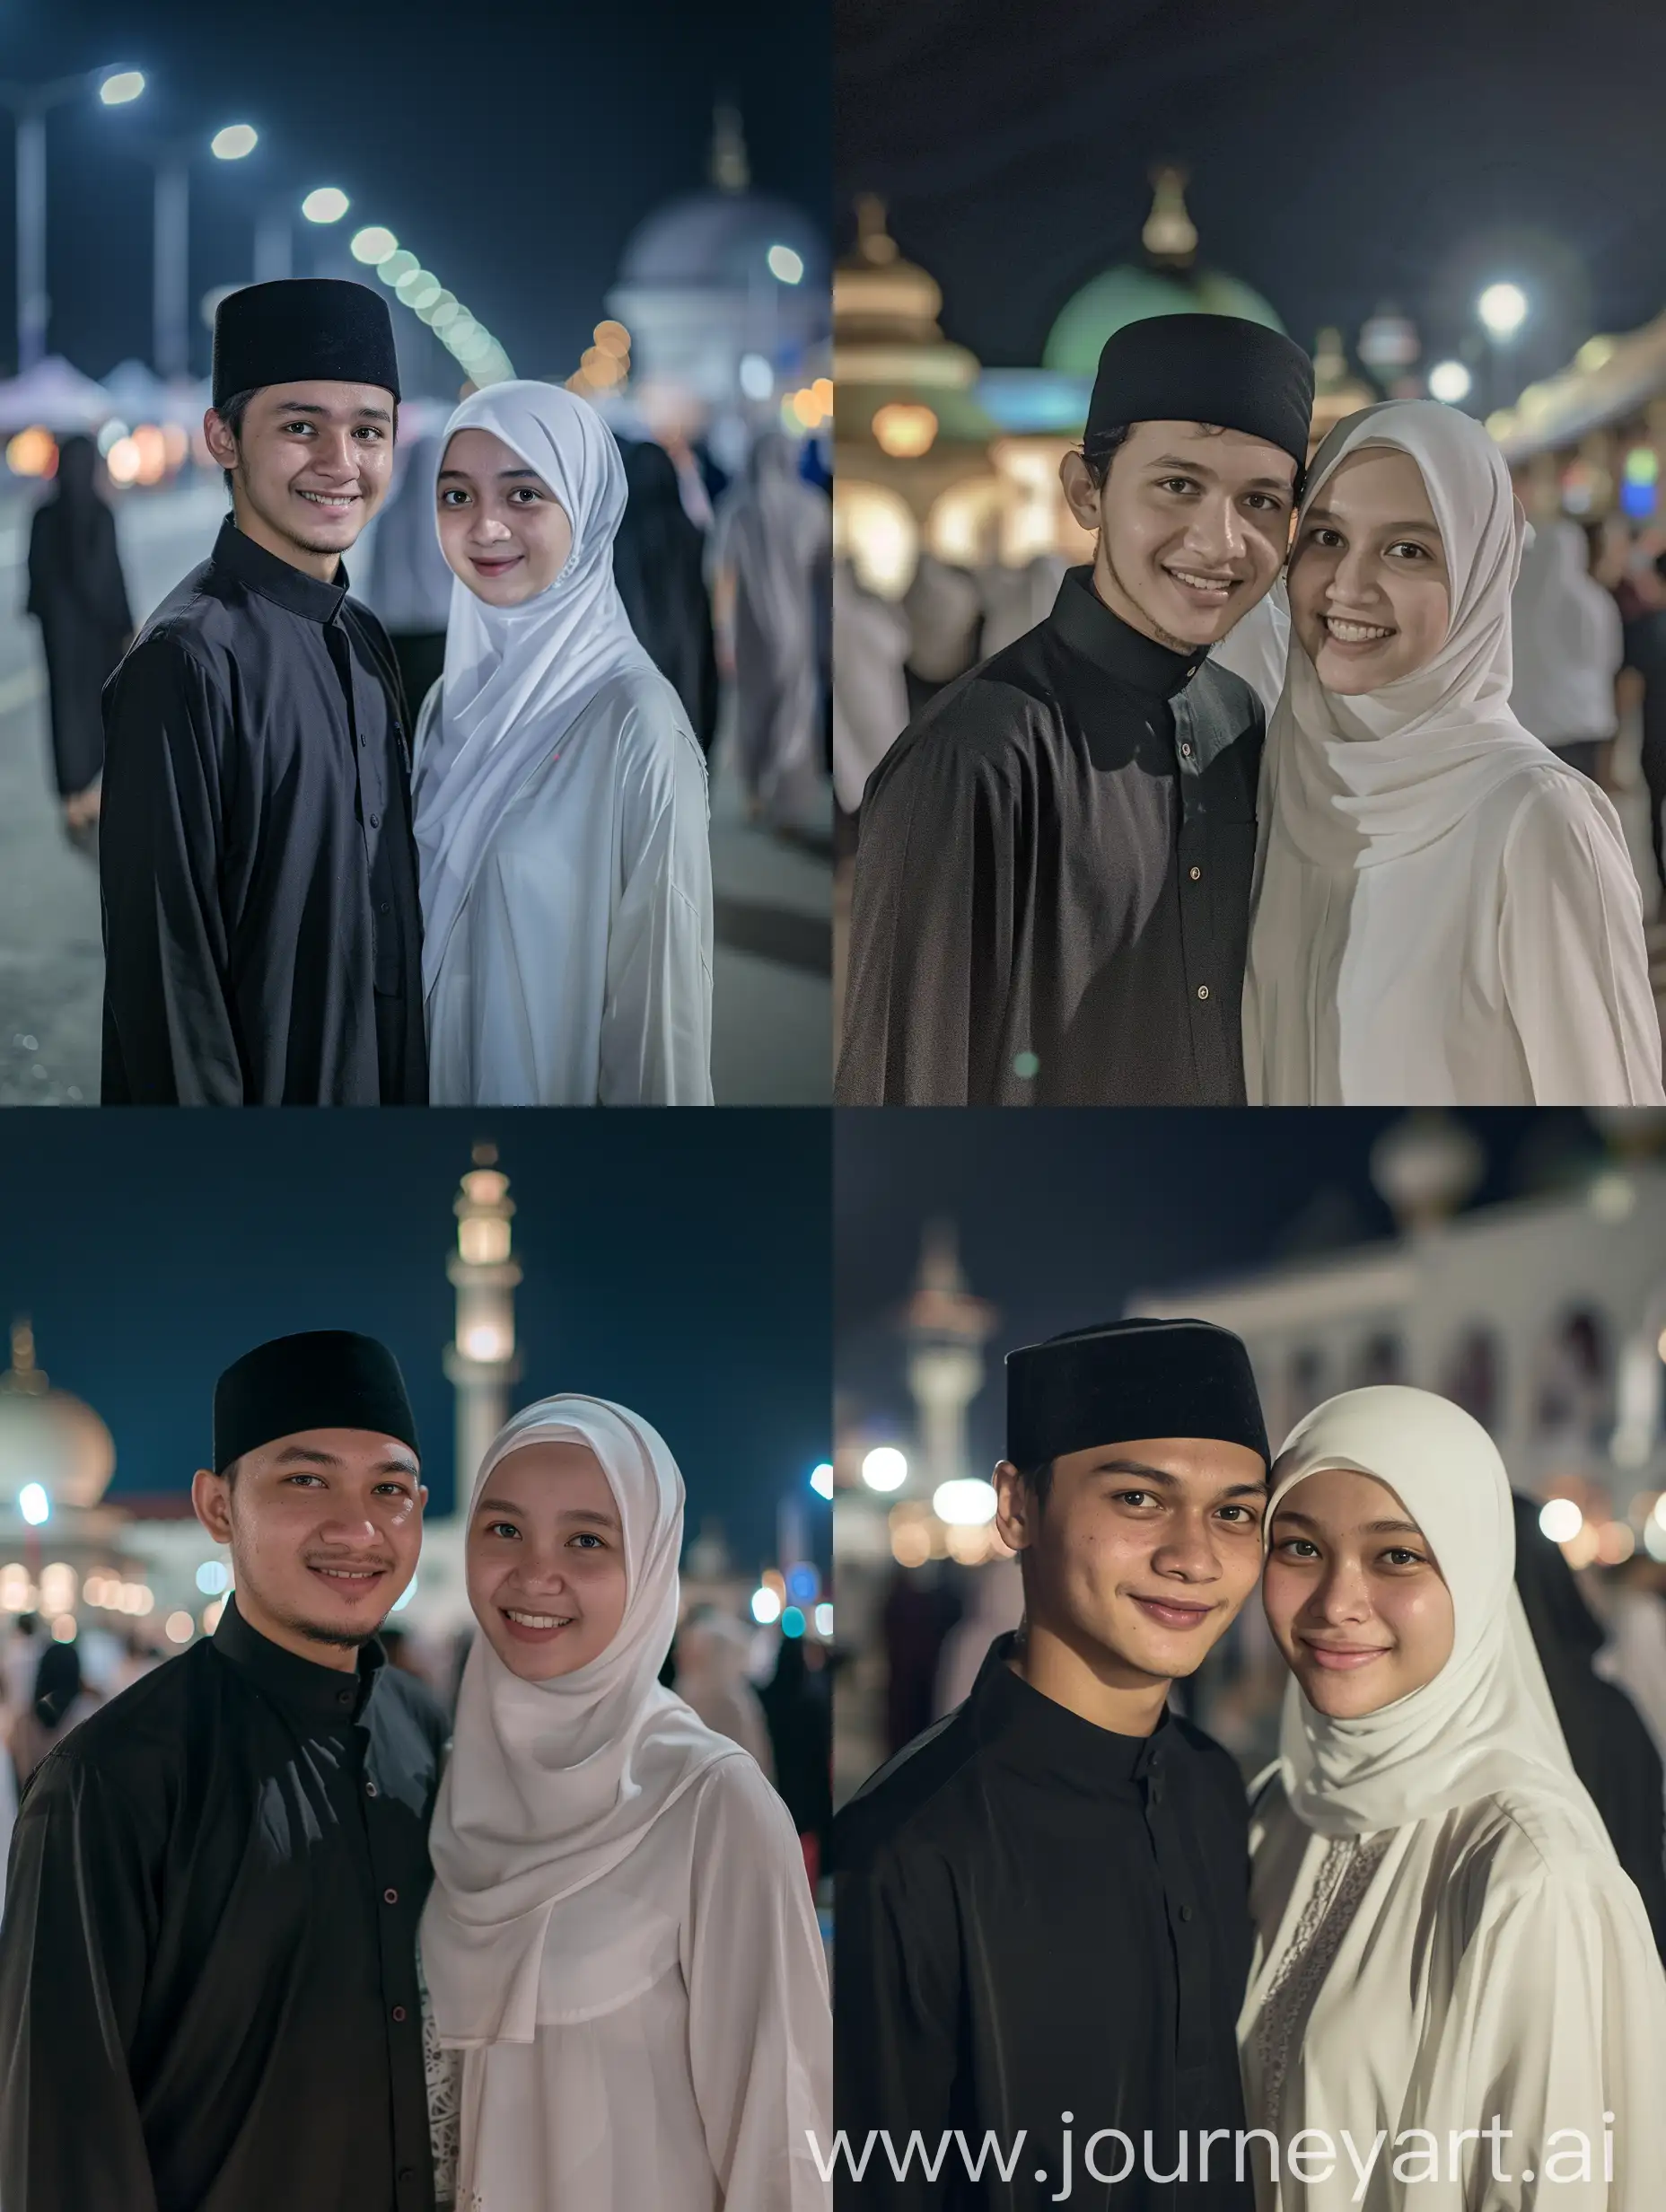 Indonesian-Couple-in-Traditional-Attire-Smiling-at-Camera-Outside-Mosque